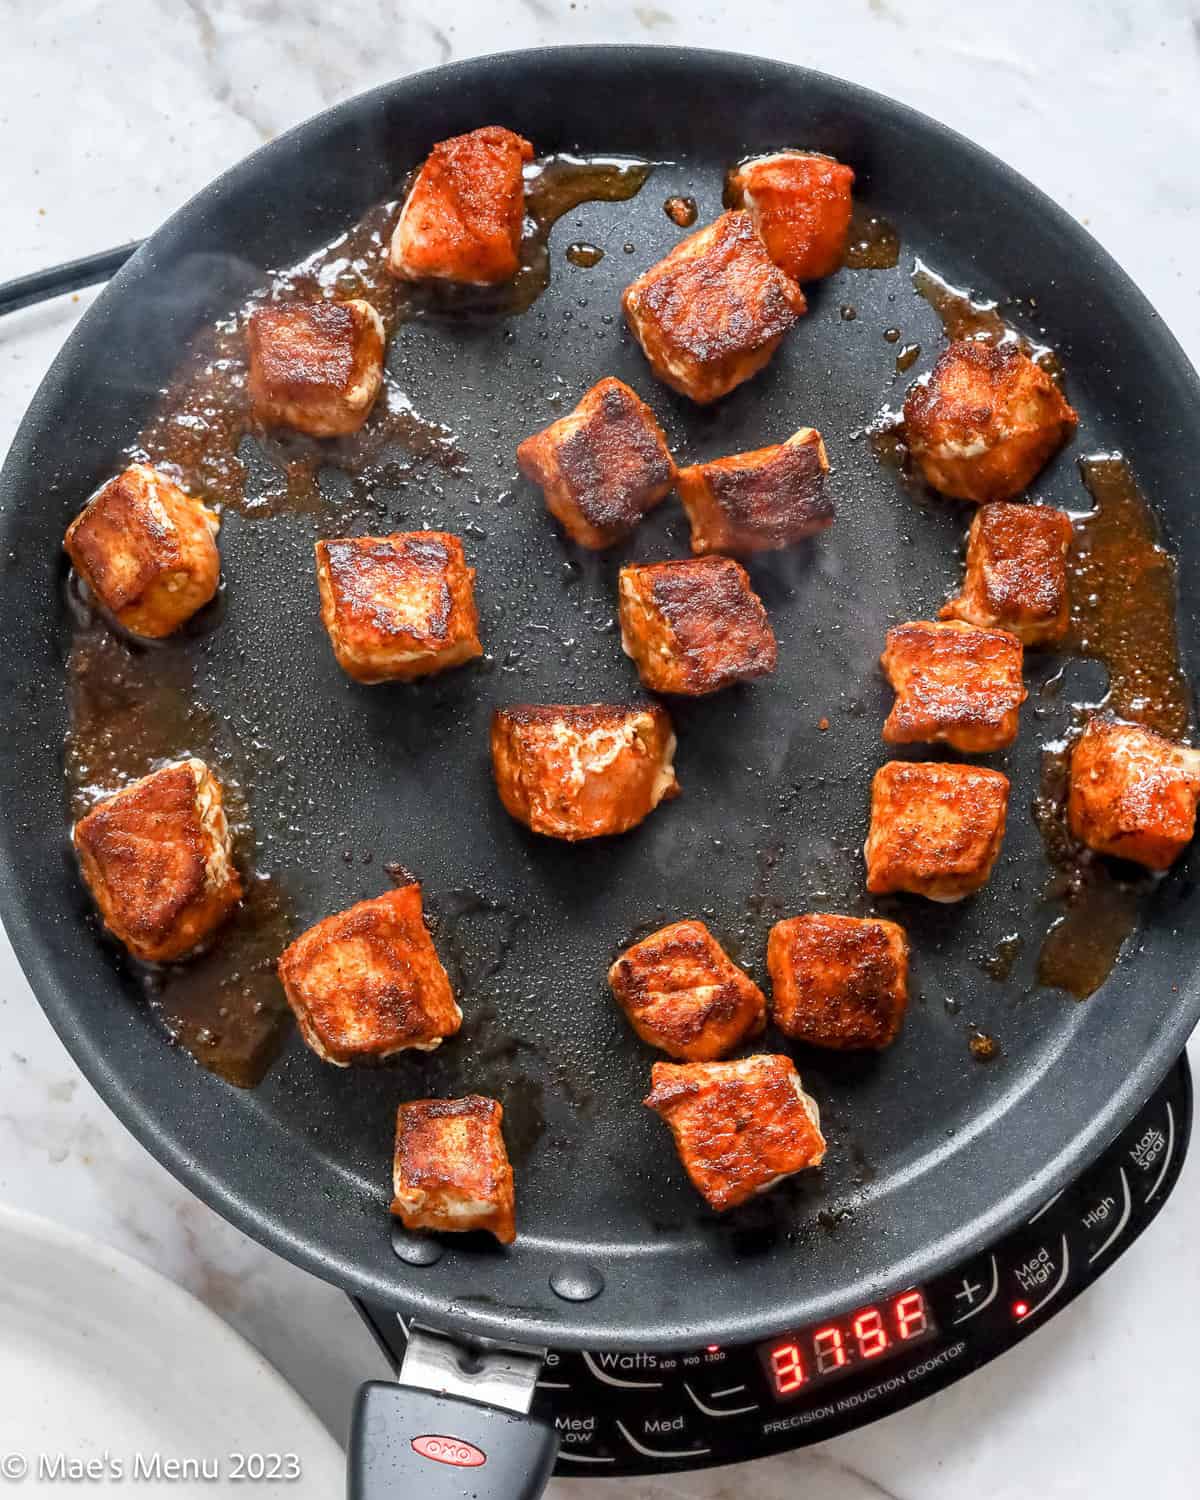 Cooking the seasoned pork chop cubes on a griddle.